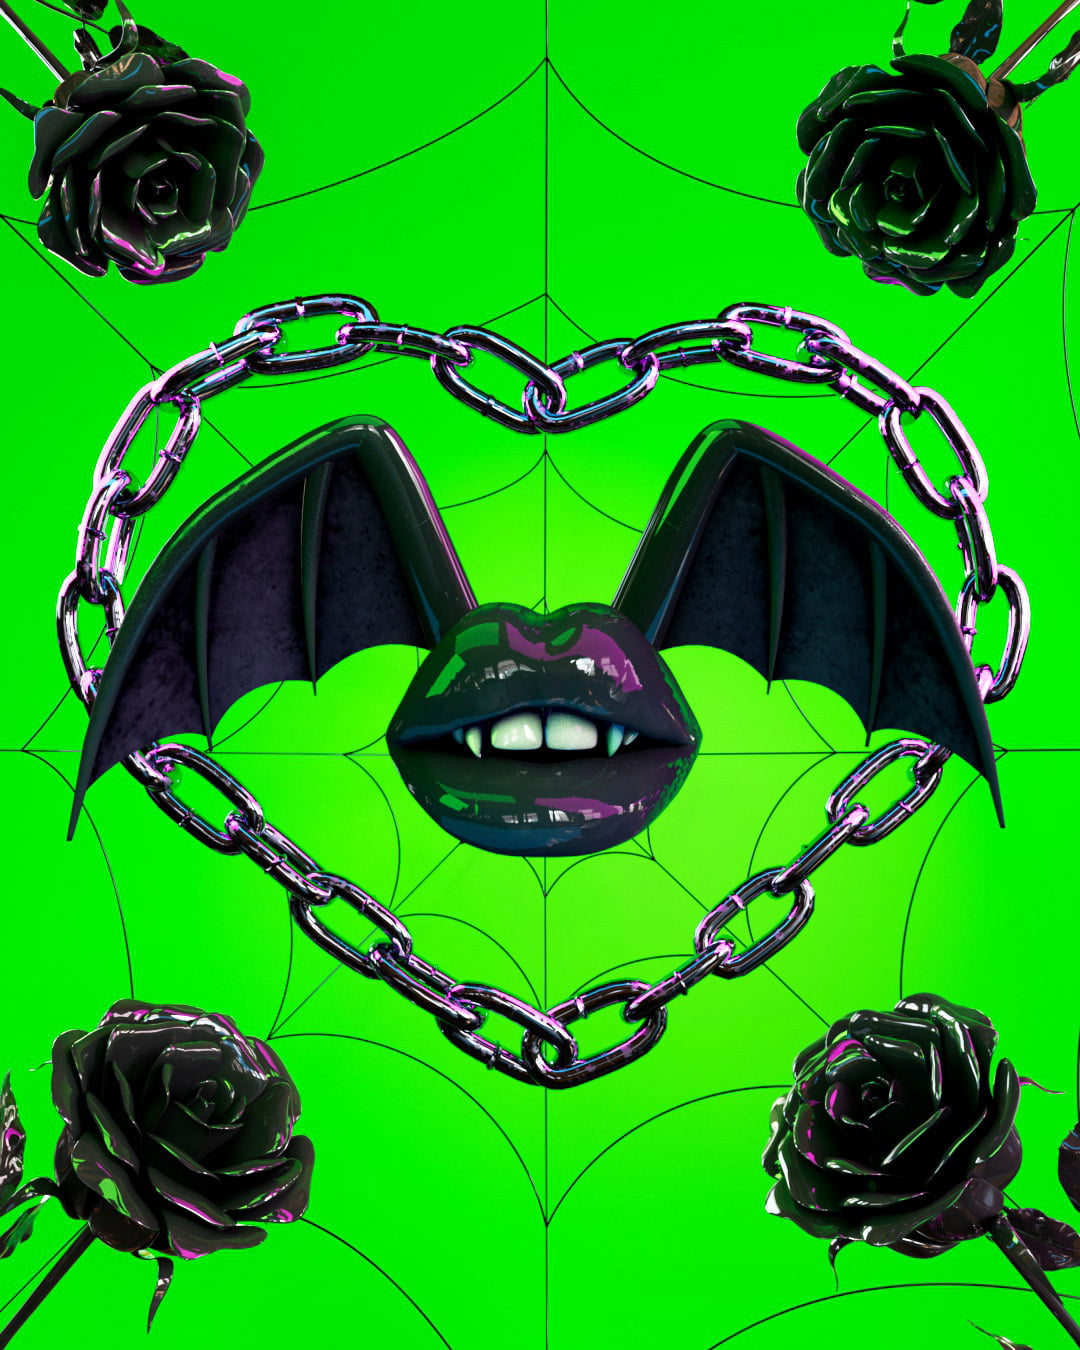 Neon green background with black spiderweb filling the space. Plastic oil slick roses on all corners. A neon silver heart shaped chain in the center framing juicy black lipstick lips with fangs and black on black webbed bat wings.